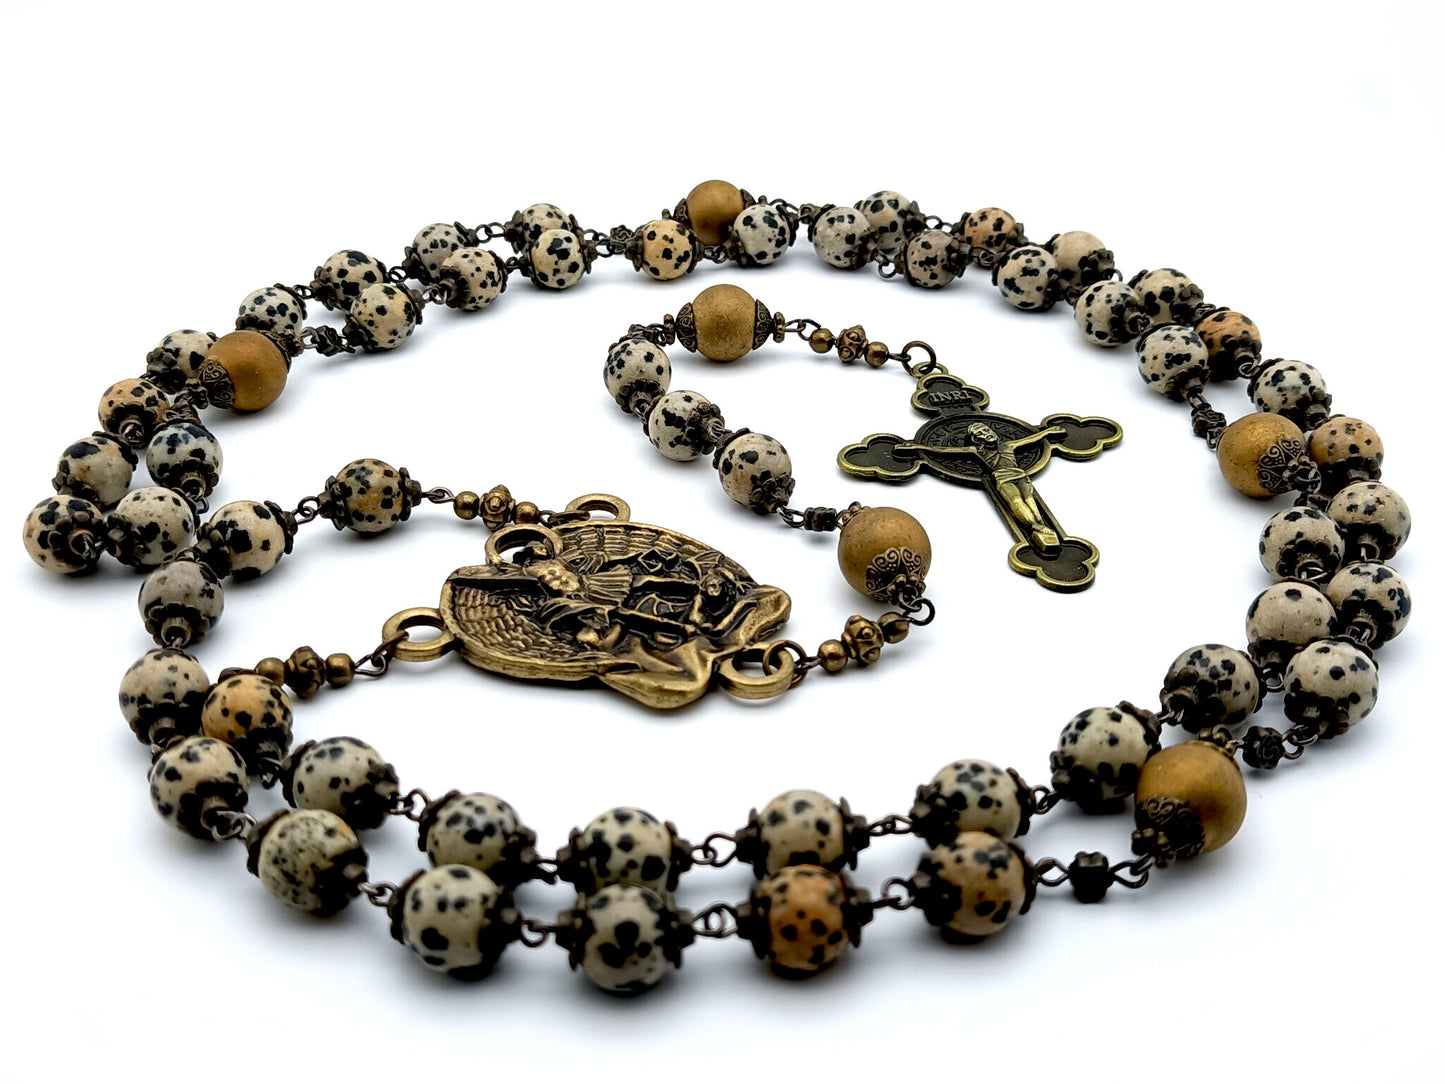 Saint Michael vintage style unique rosary beads with gemstone bead, bronze crucifix, centre medal and bead caps.